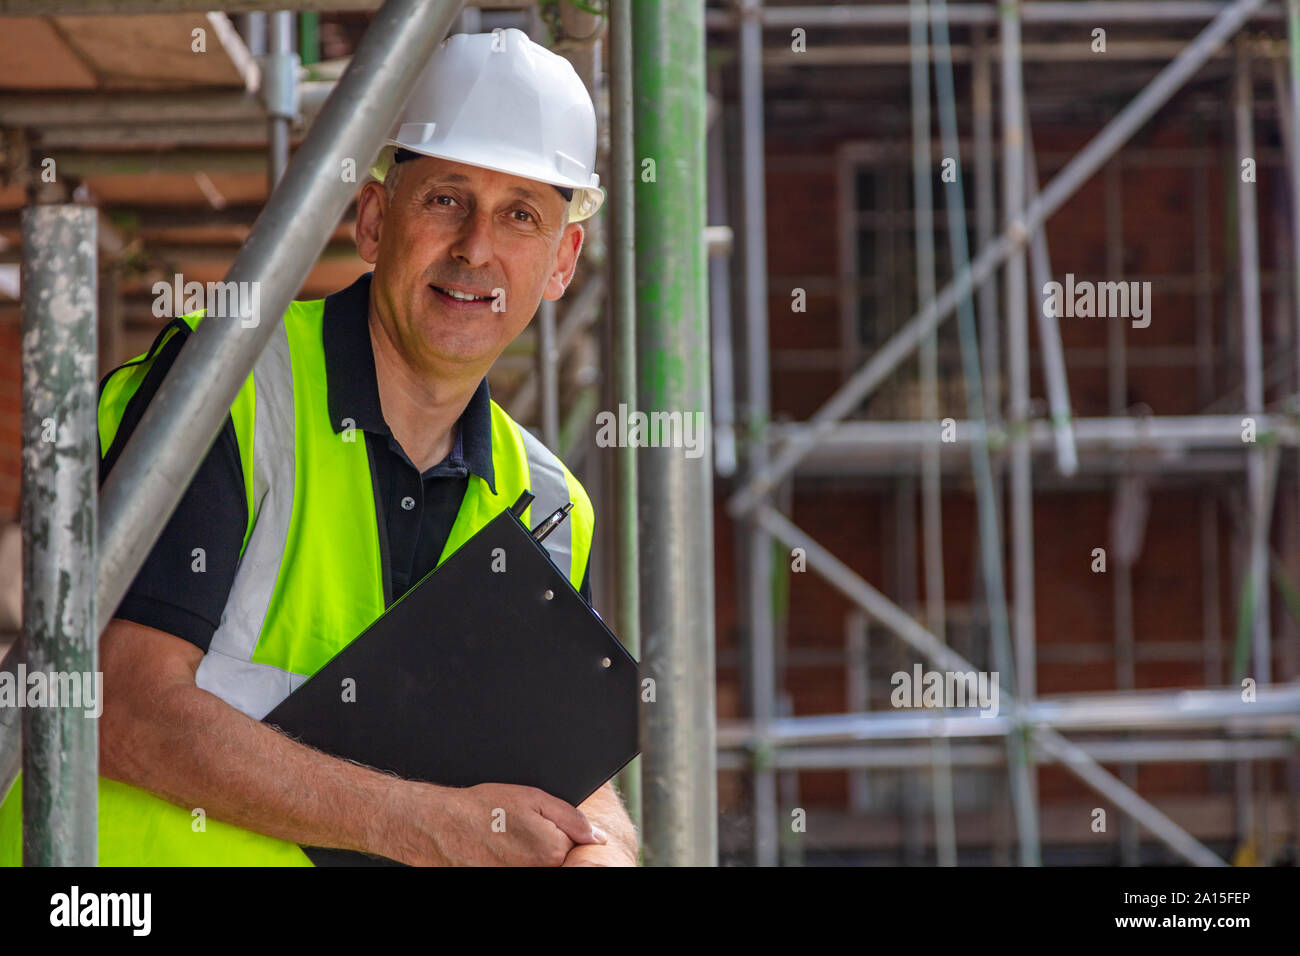 Male builder foreman, construction worker, engineer, surveyor or site manager holding a clipboard, wearing a white hard hat and hi vis vest standing o Stock Photo